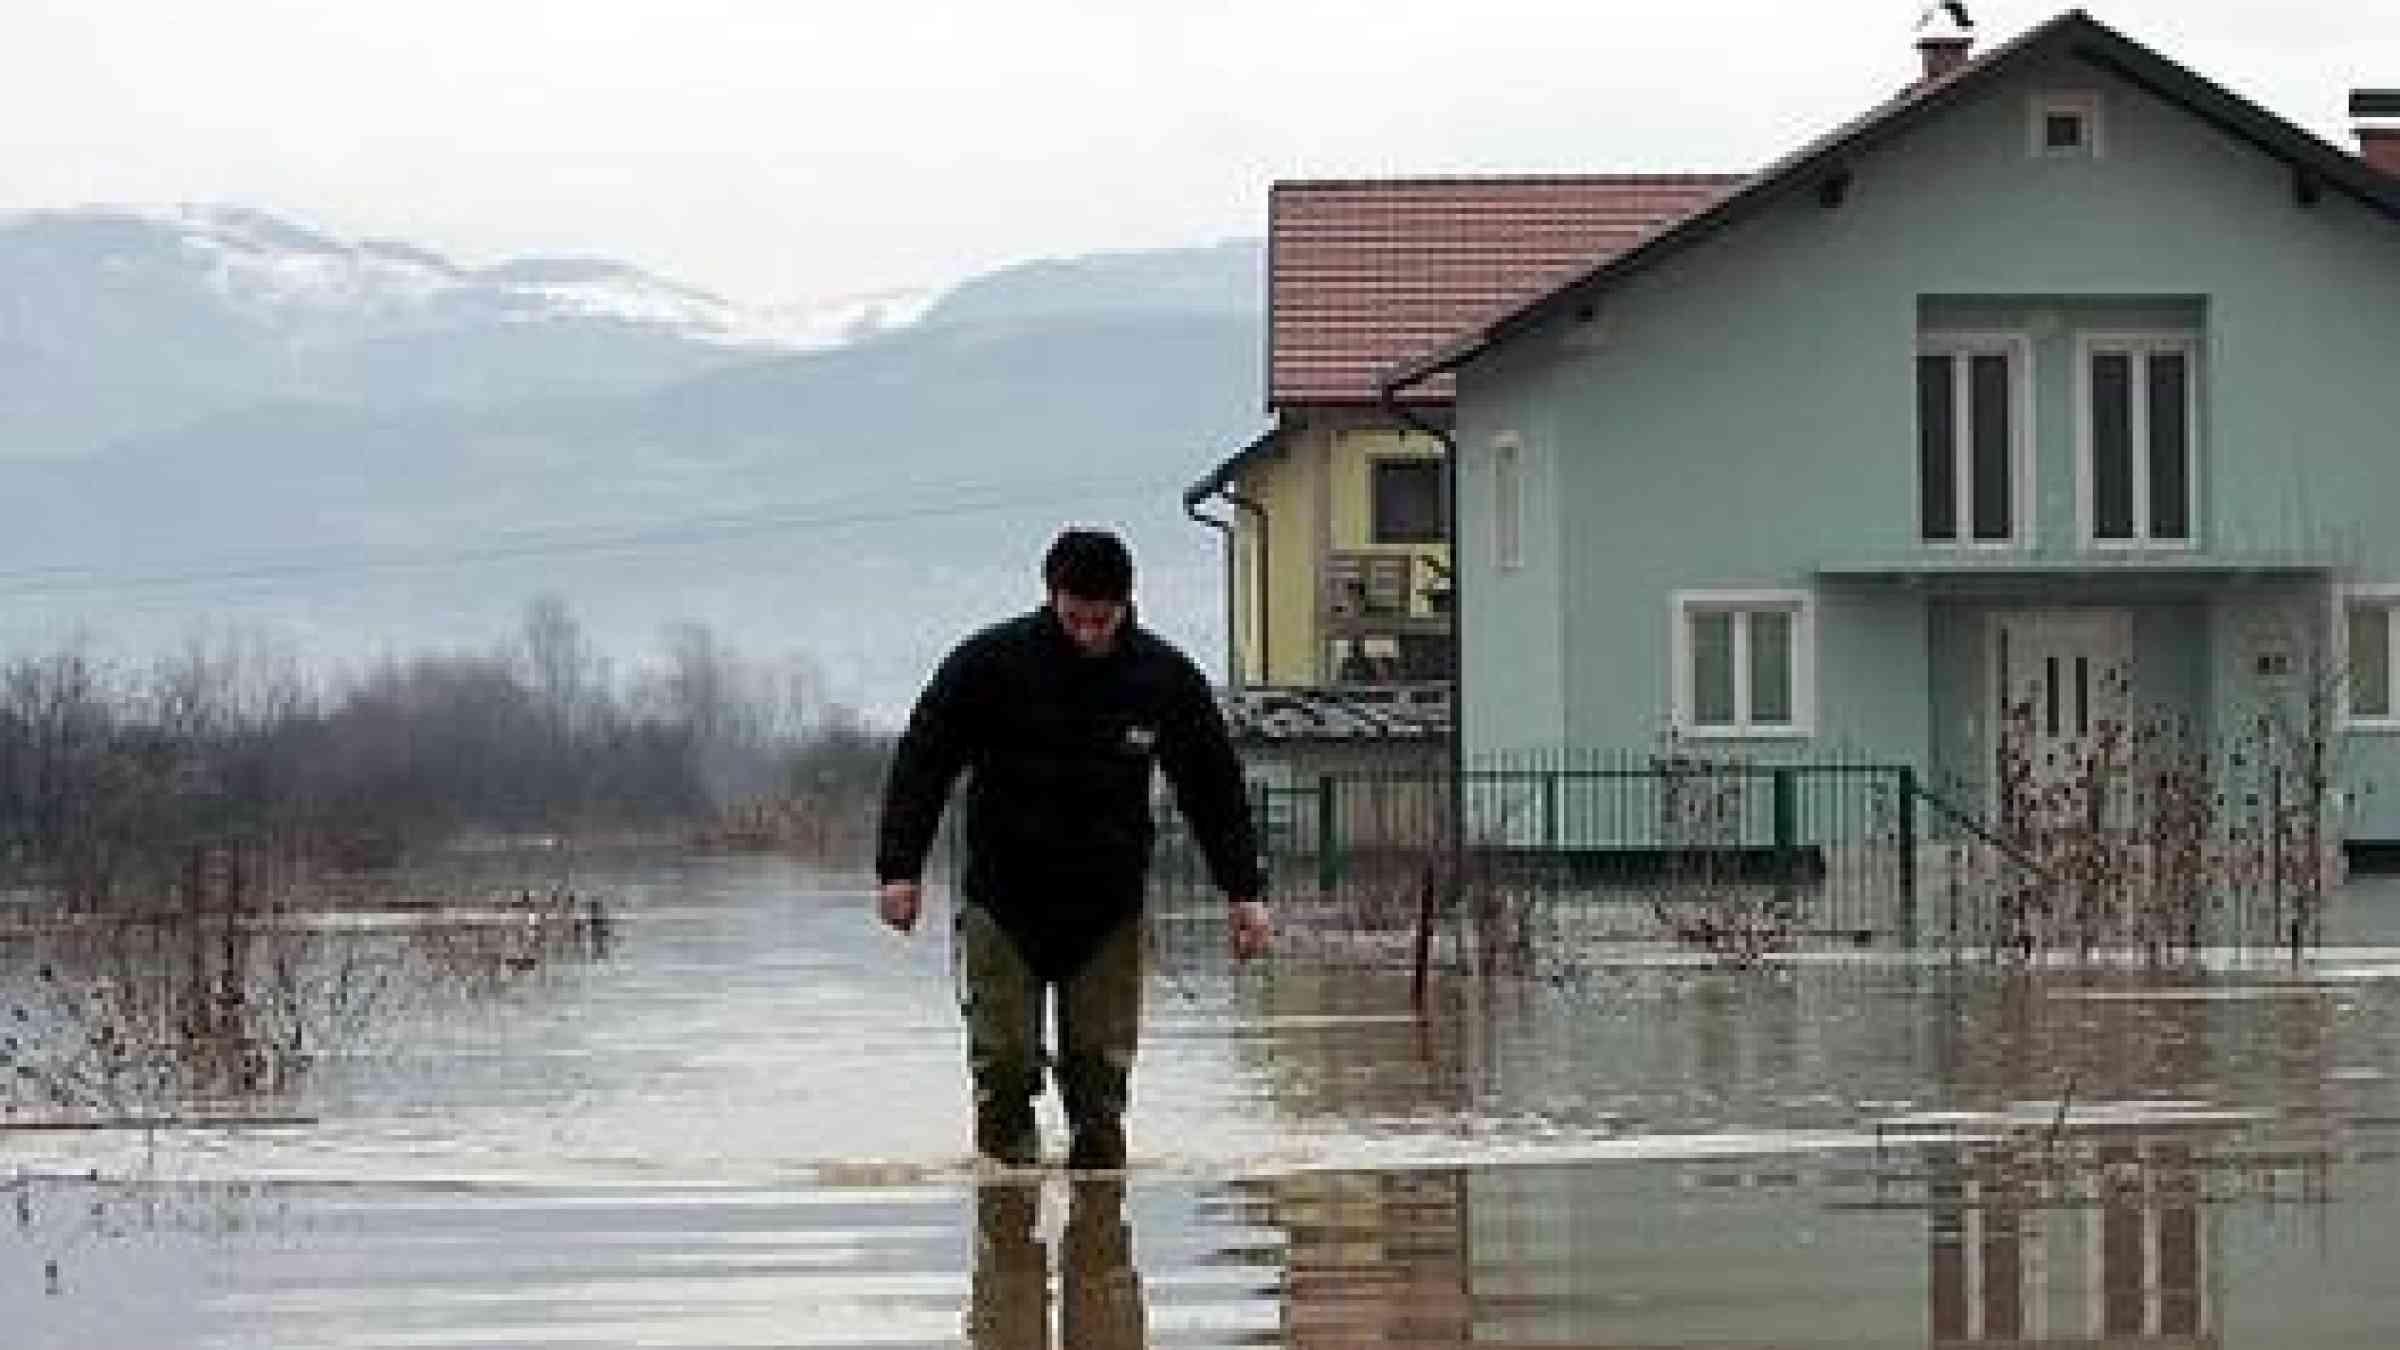 A Bosnian man walks through flooded water near Sarajevo. Heavy rain and melting snow from mountains caused flooding of the river Bosnia in a suburban part of Sarajevo leaving more than 30 houses flooded in January 2010.